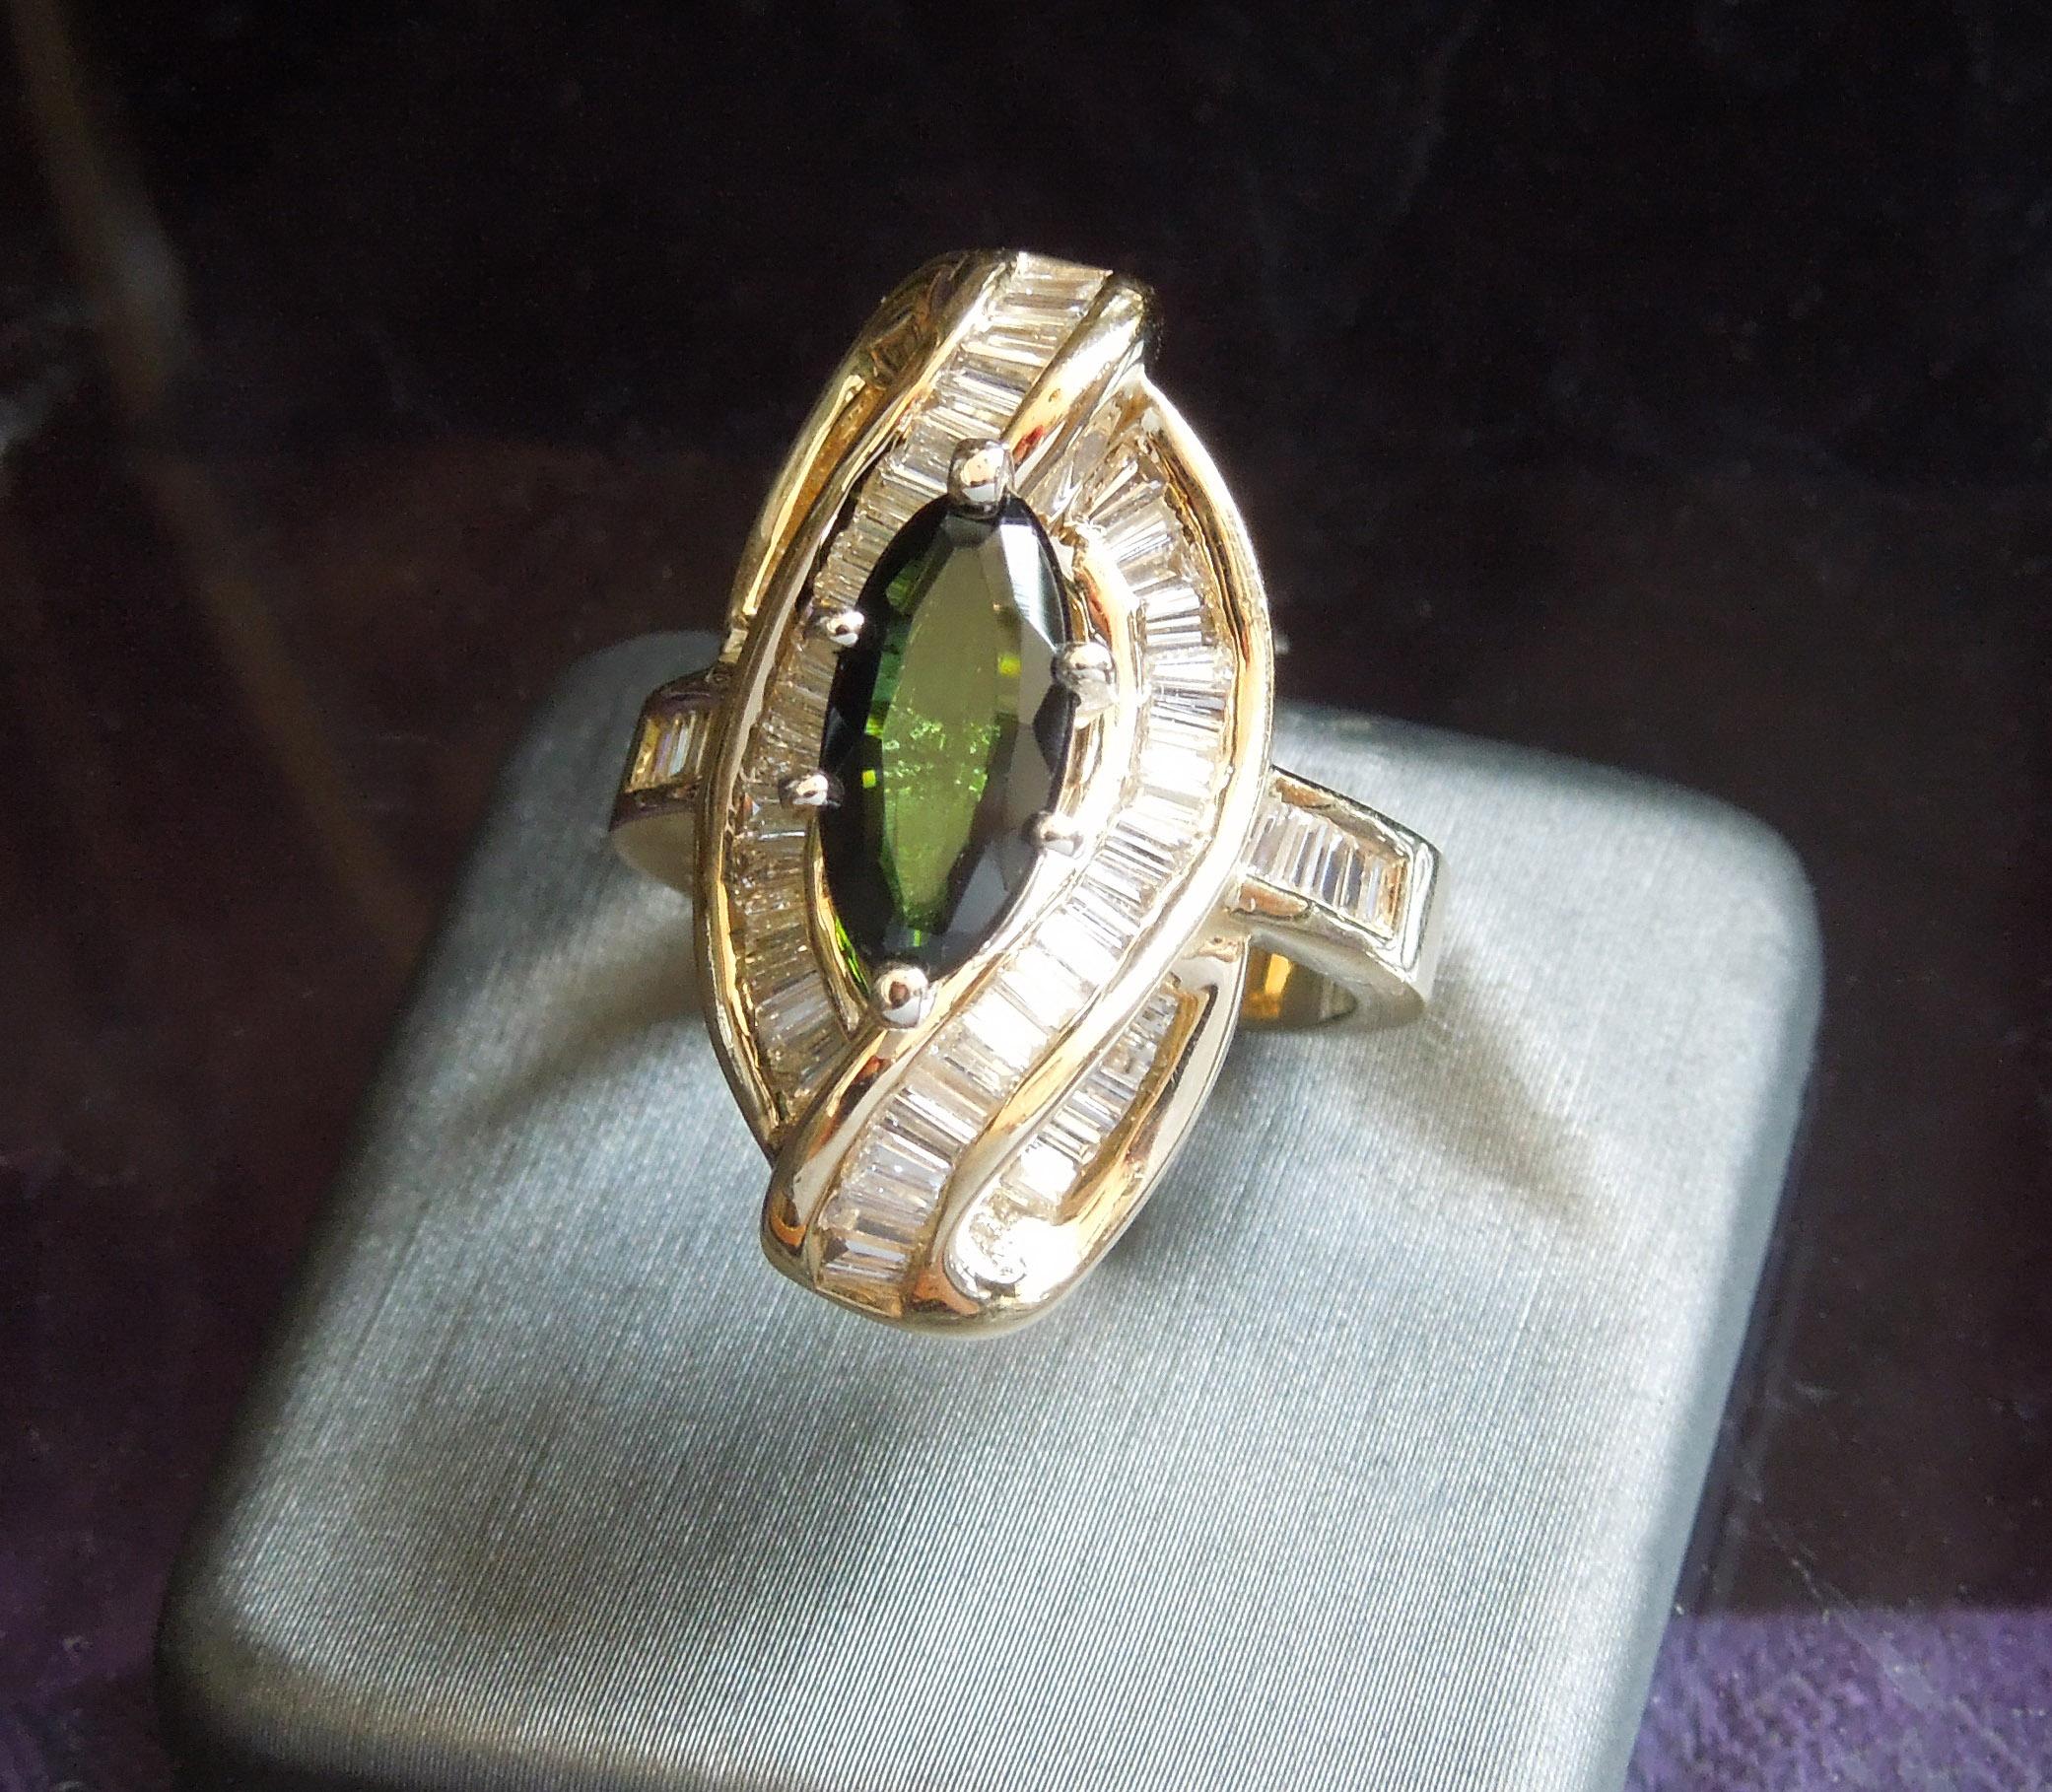 Containing 1 Central Elongated Oval cut Natural Green Tourmaline weighing approximately 1.83 carats at 11.3mm in length x 5.5mm at widest, secured in a 6-Prong Setting - A prized Precious Green Gemstone, becoming extremely rare with mines nearly